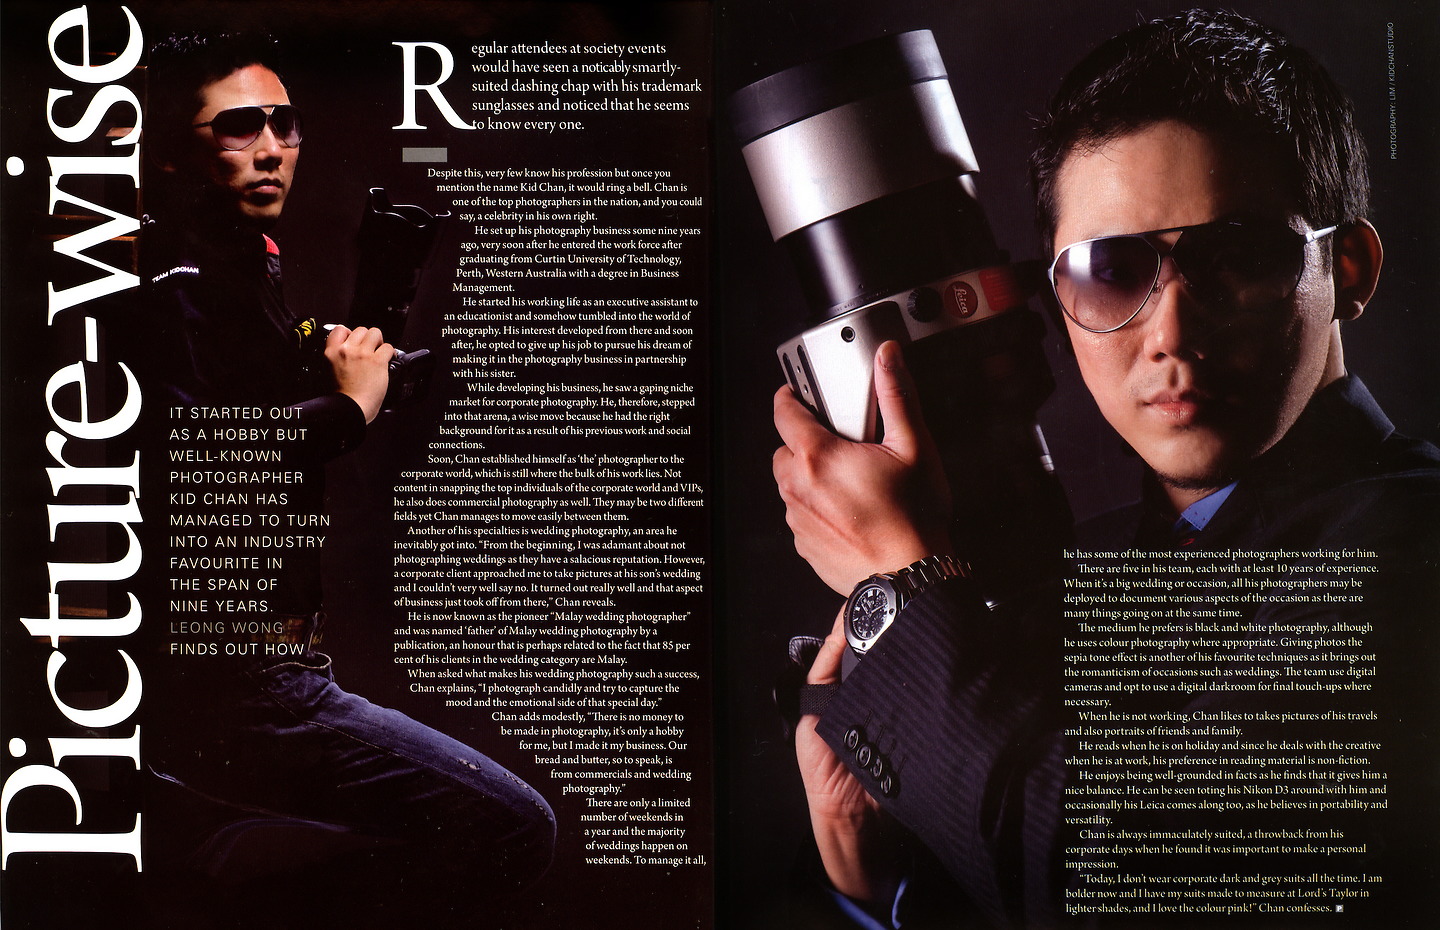 Prestige Malaysia: Kid Chan, 'Picture-wise', March 2009